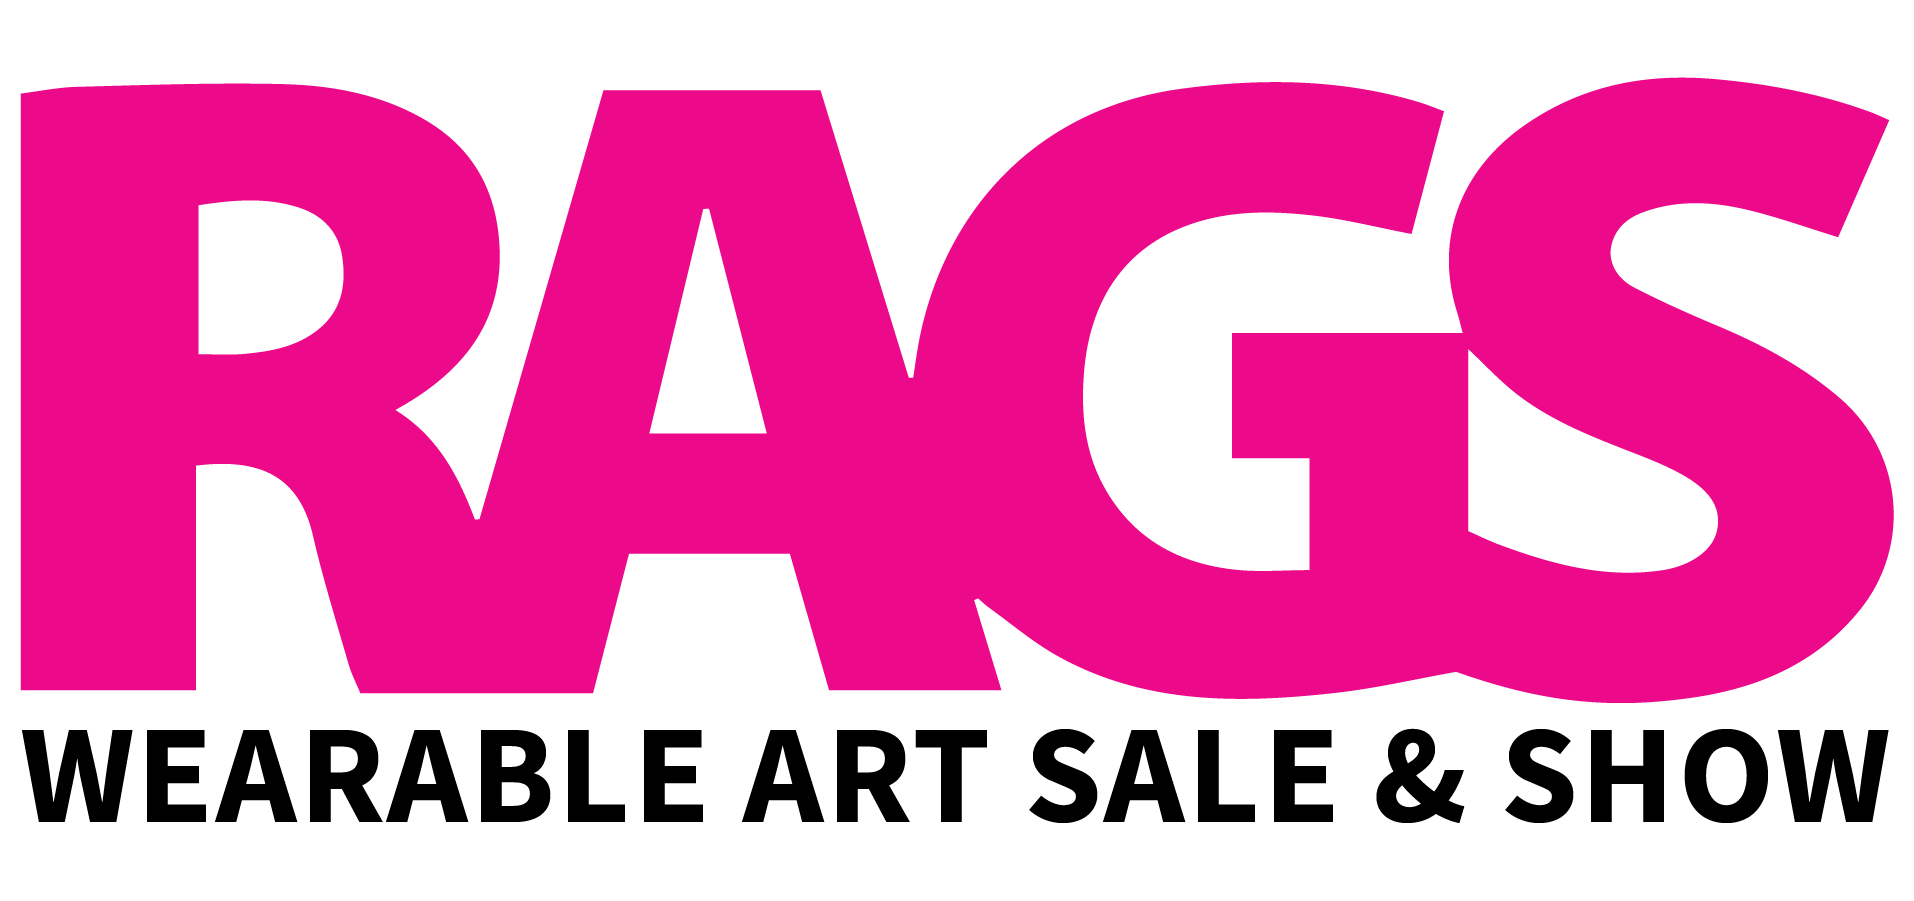 Rags Wearable Art Sale and Show logo